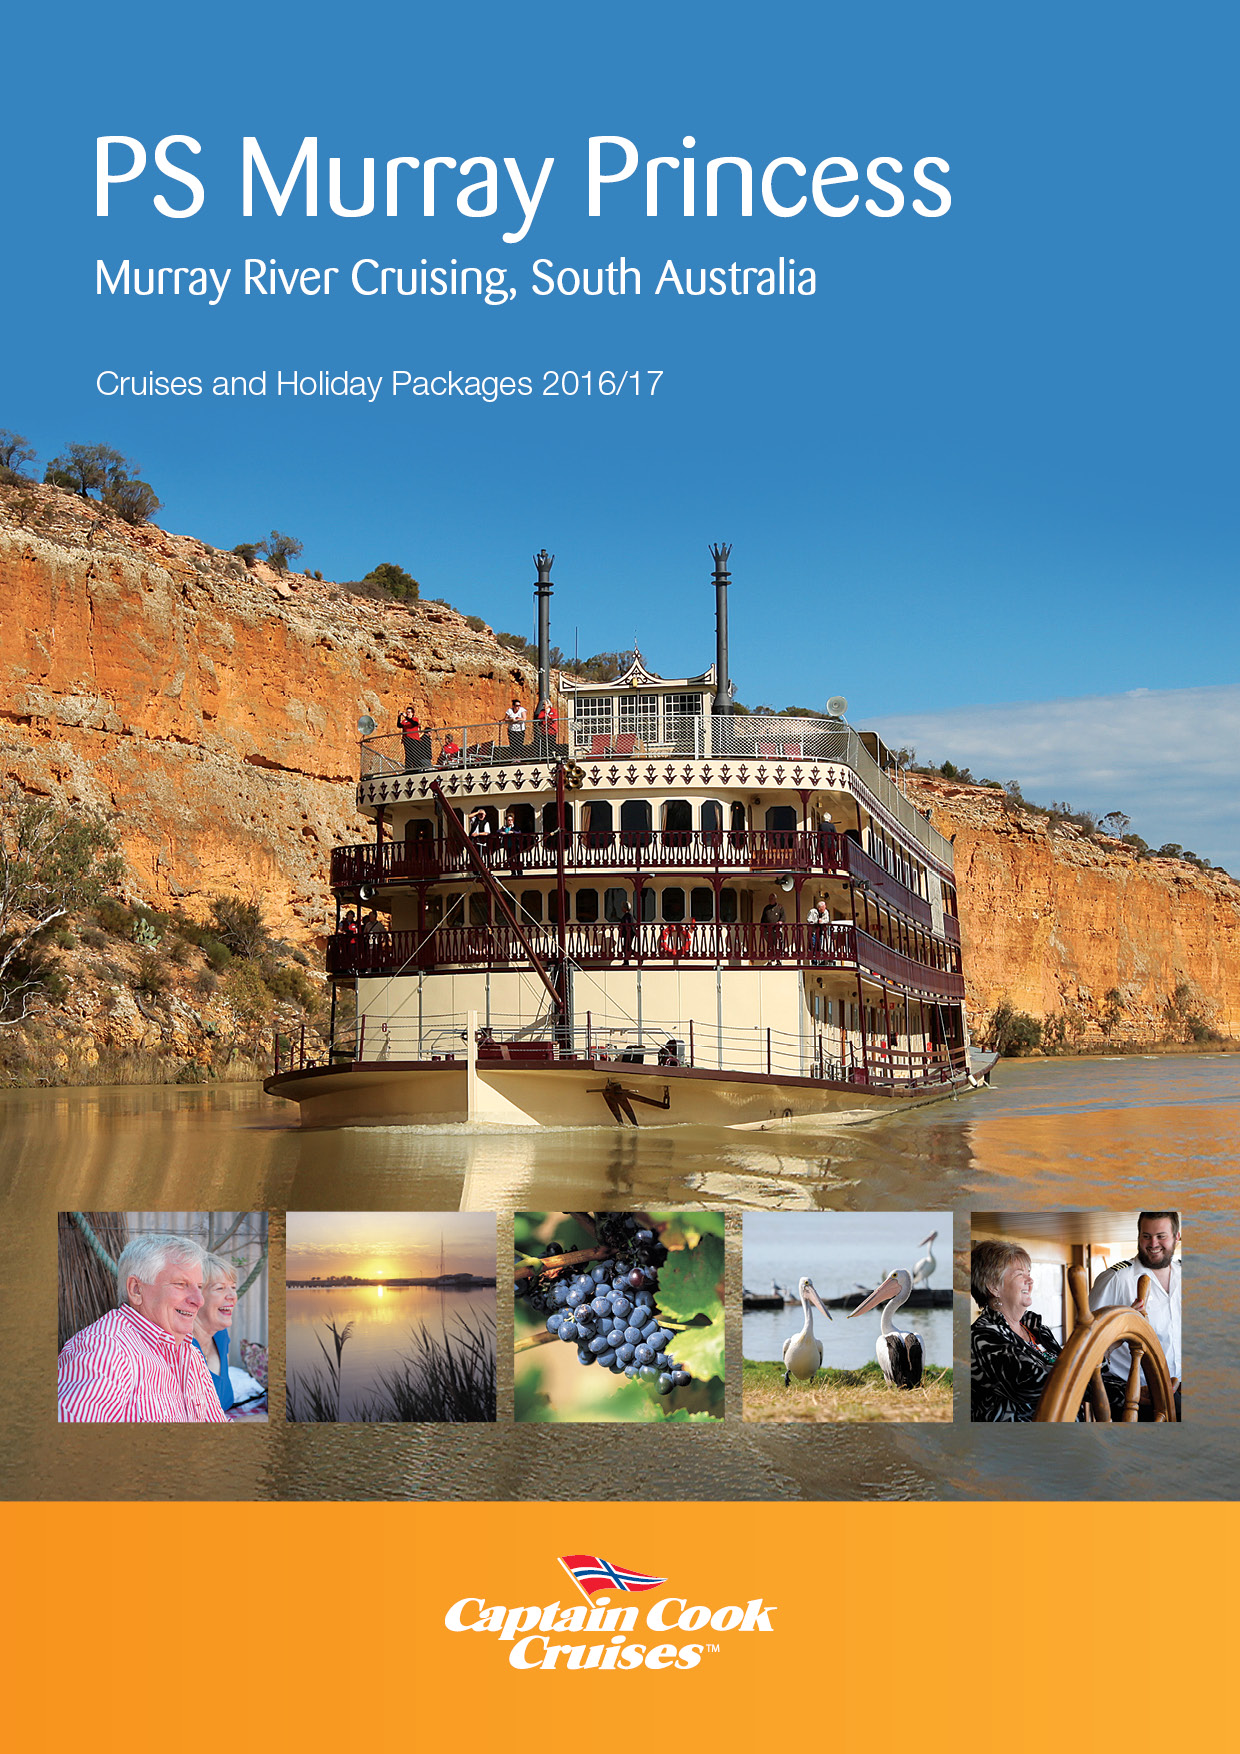 Experience the Murray River with new Murray Princess cruising brochure